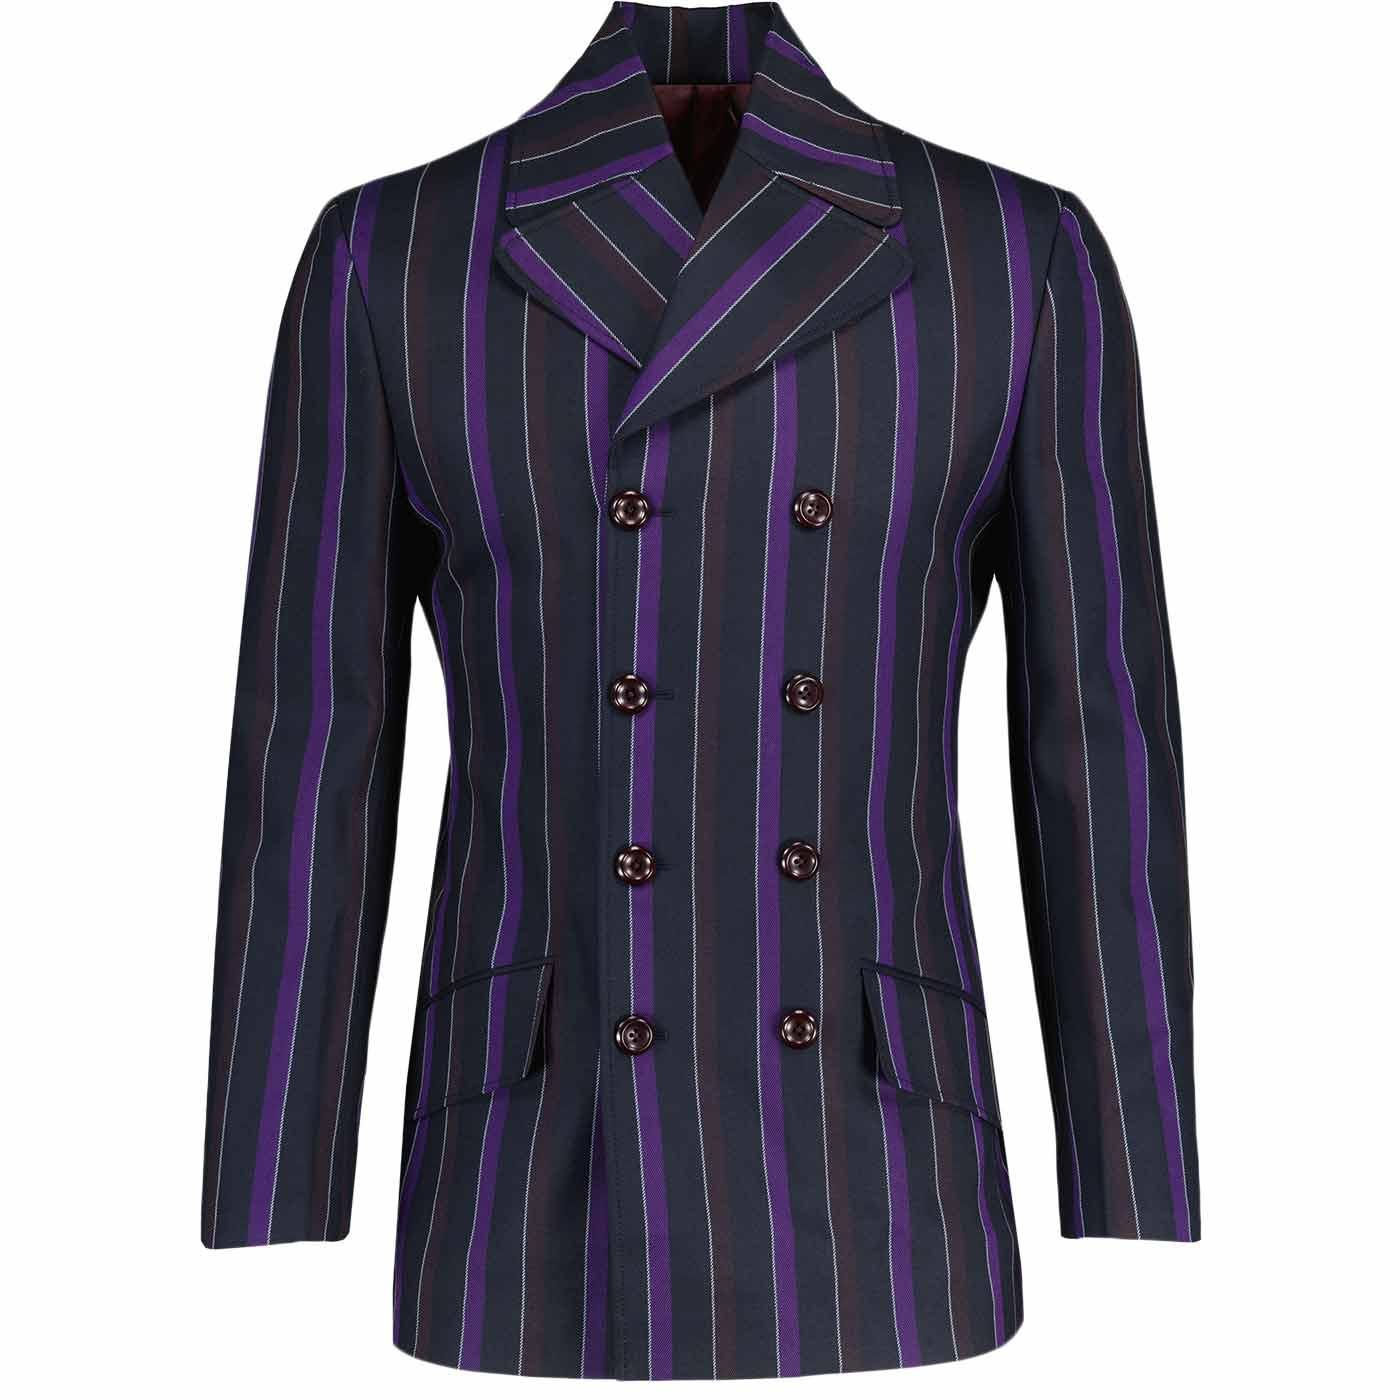 Backbeat MADCAP ENGLAND Double Breasted Blazer PP